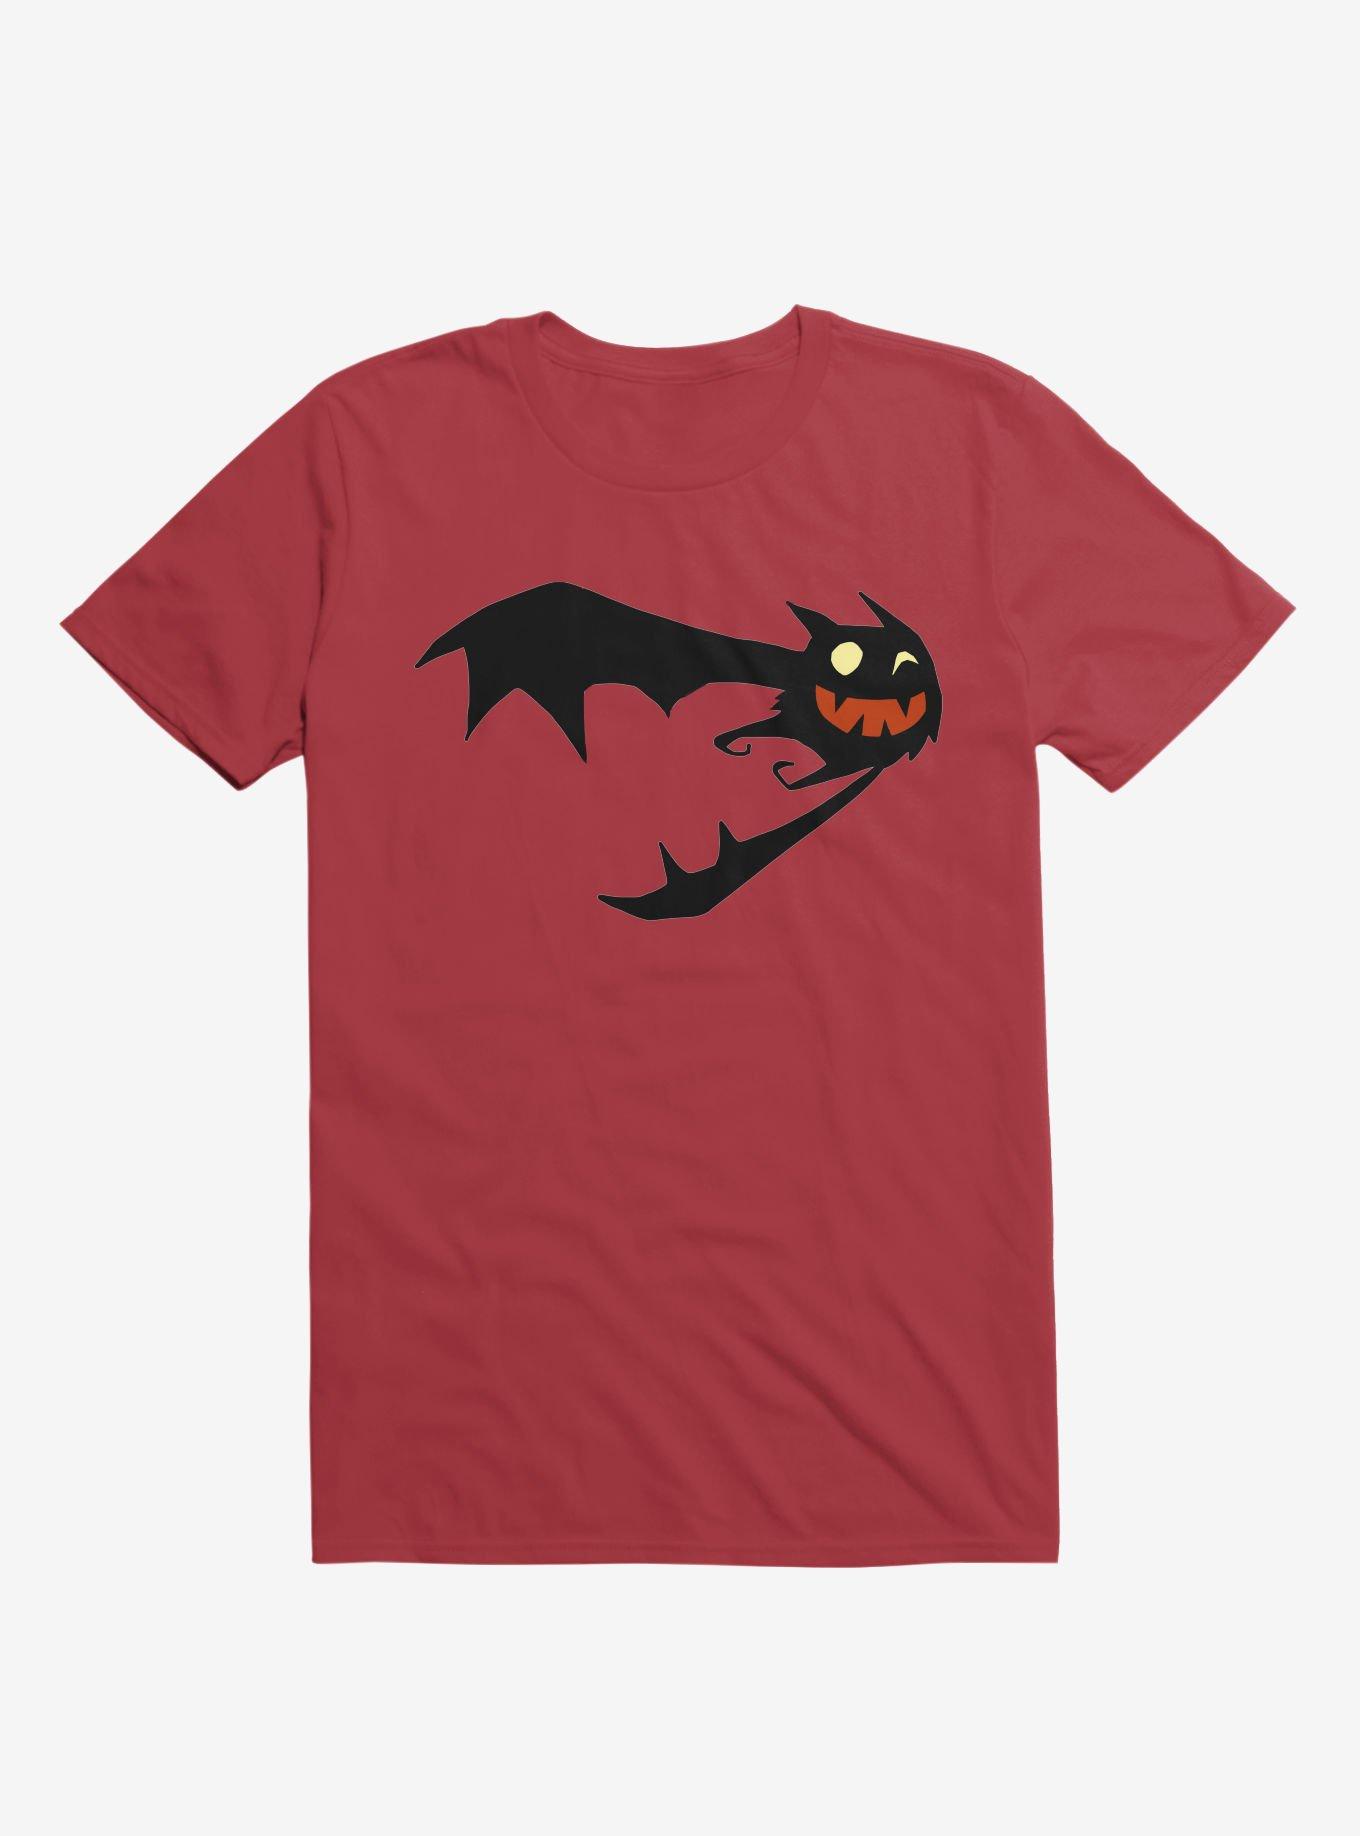 Charming Little Bat Red T-Shirt, RED, hi-res